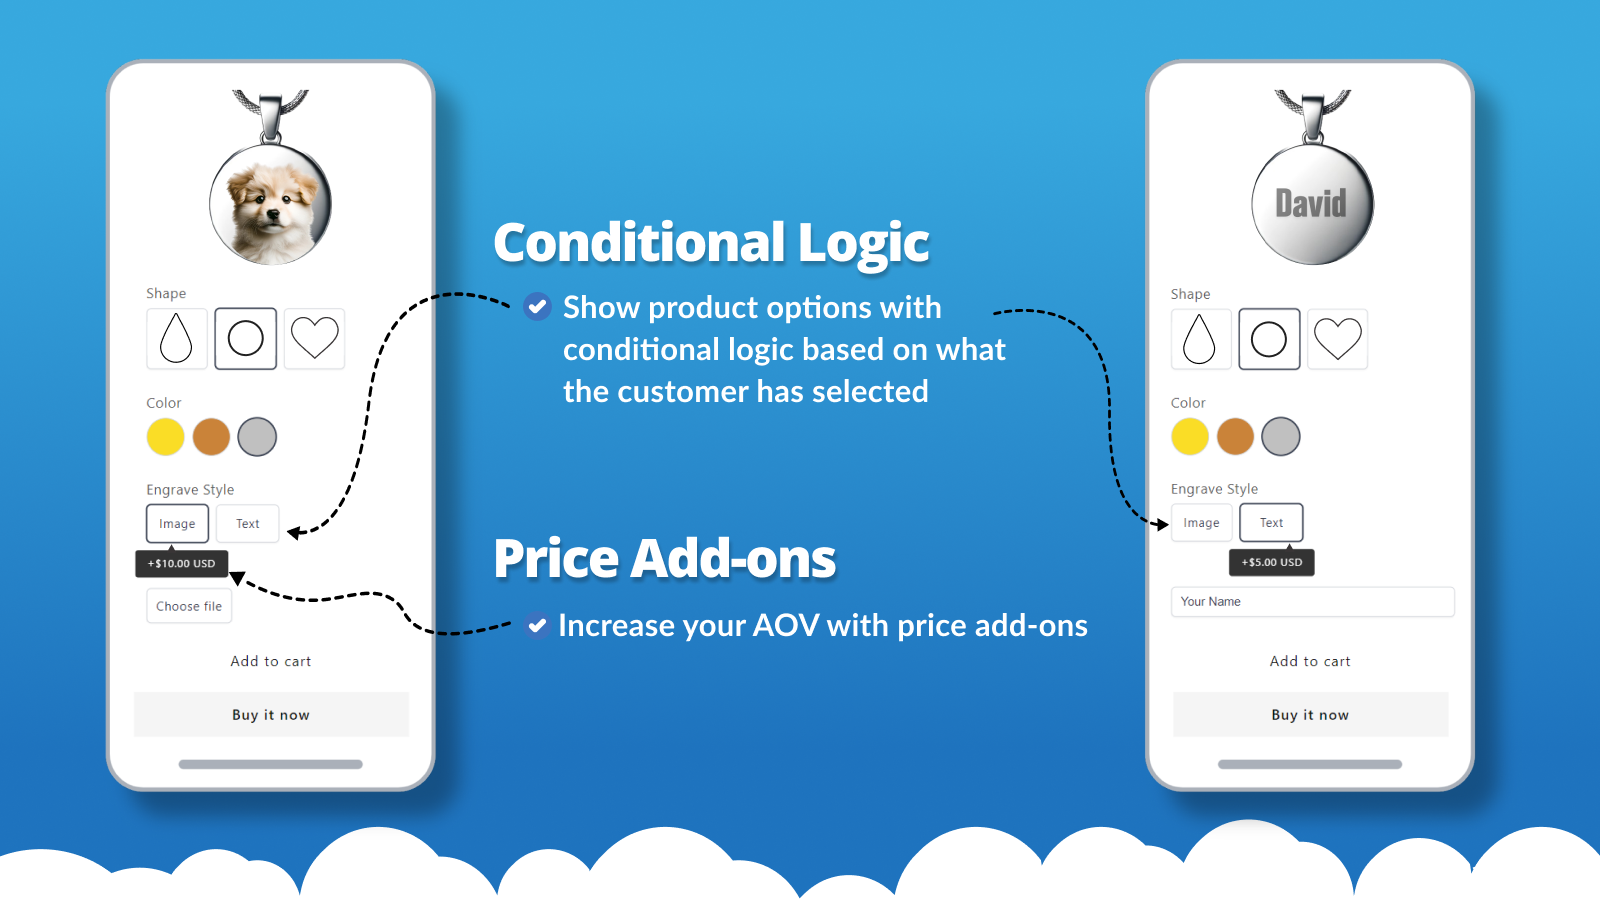 Show product options based on specific conditions